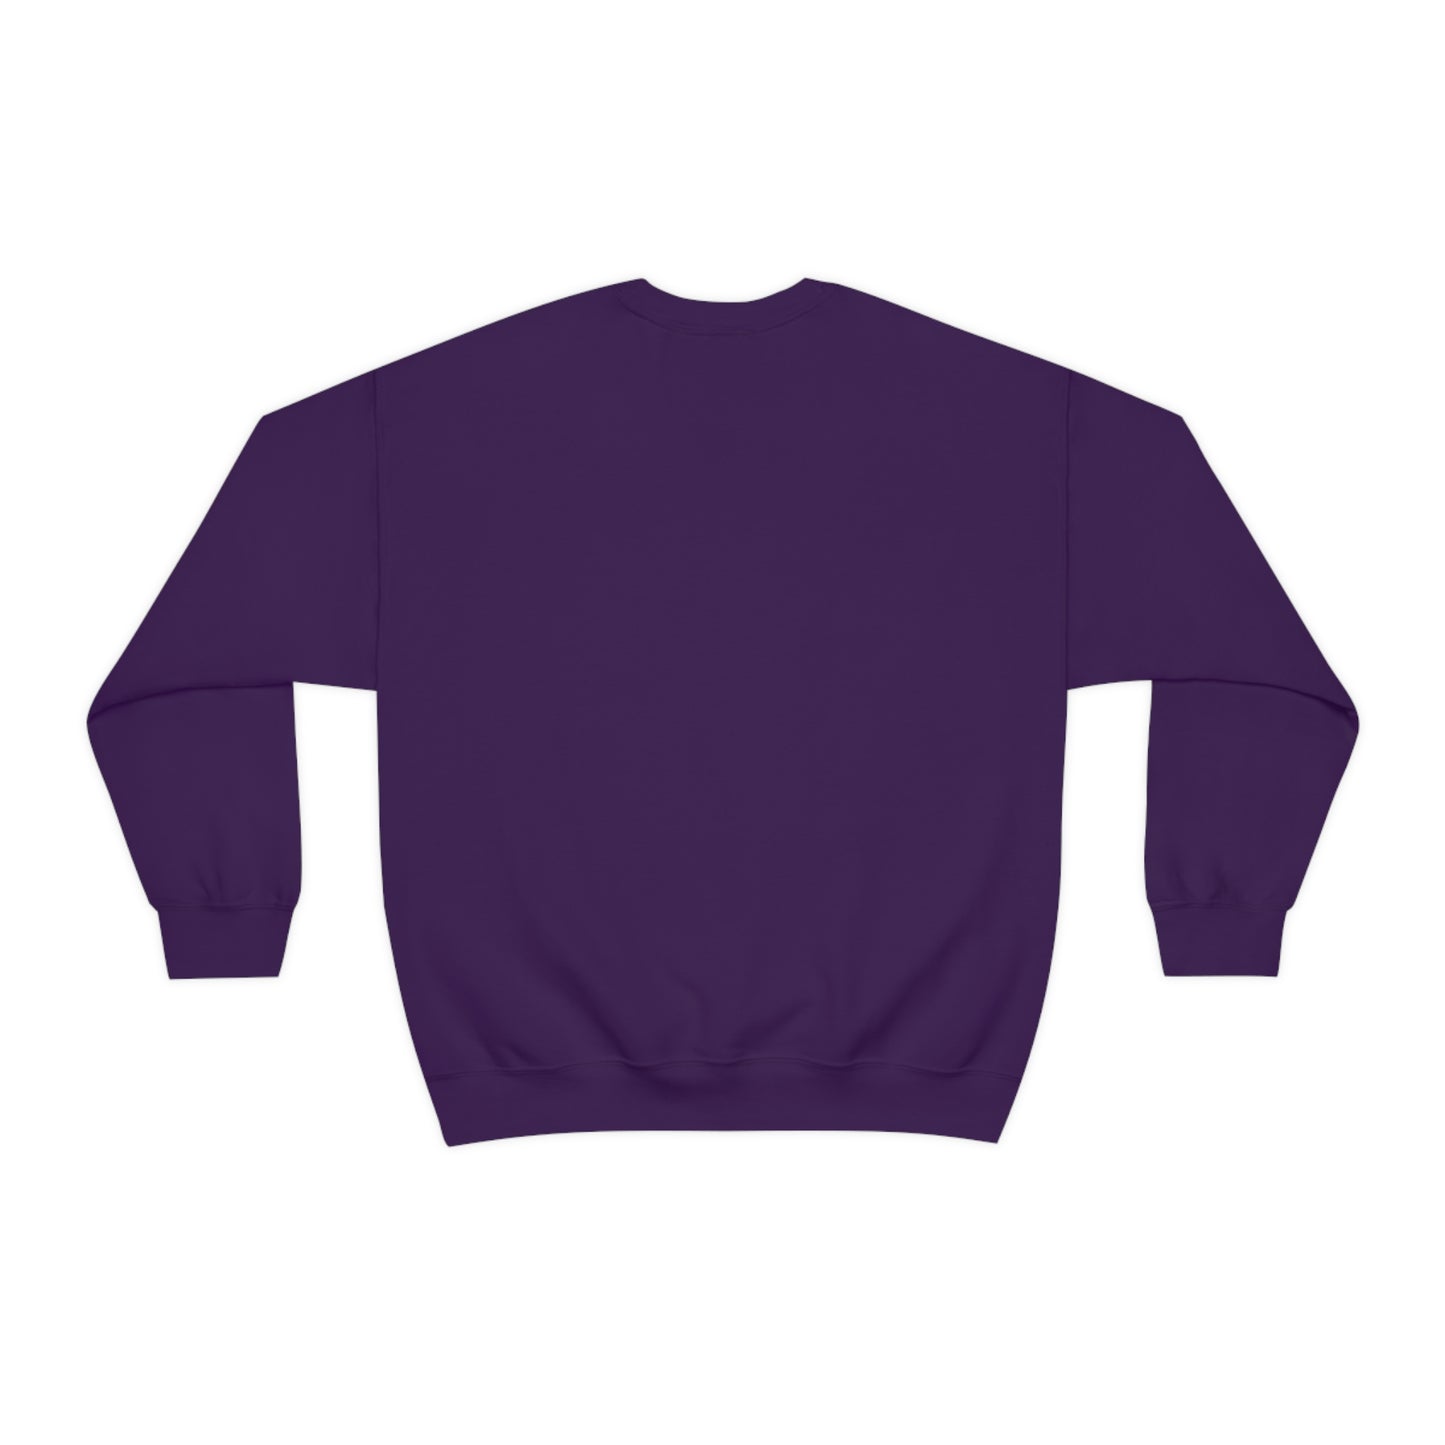 Flat back view of the Purple shirt